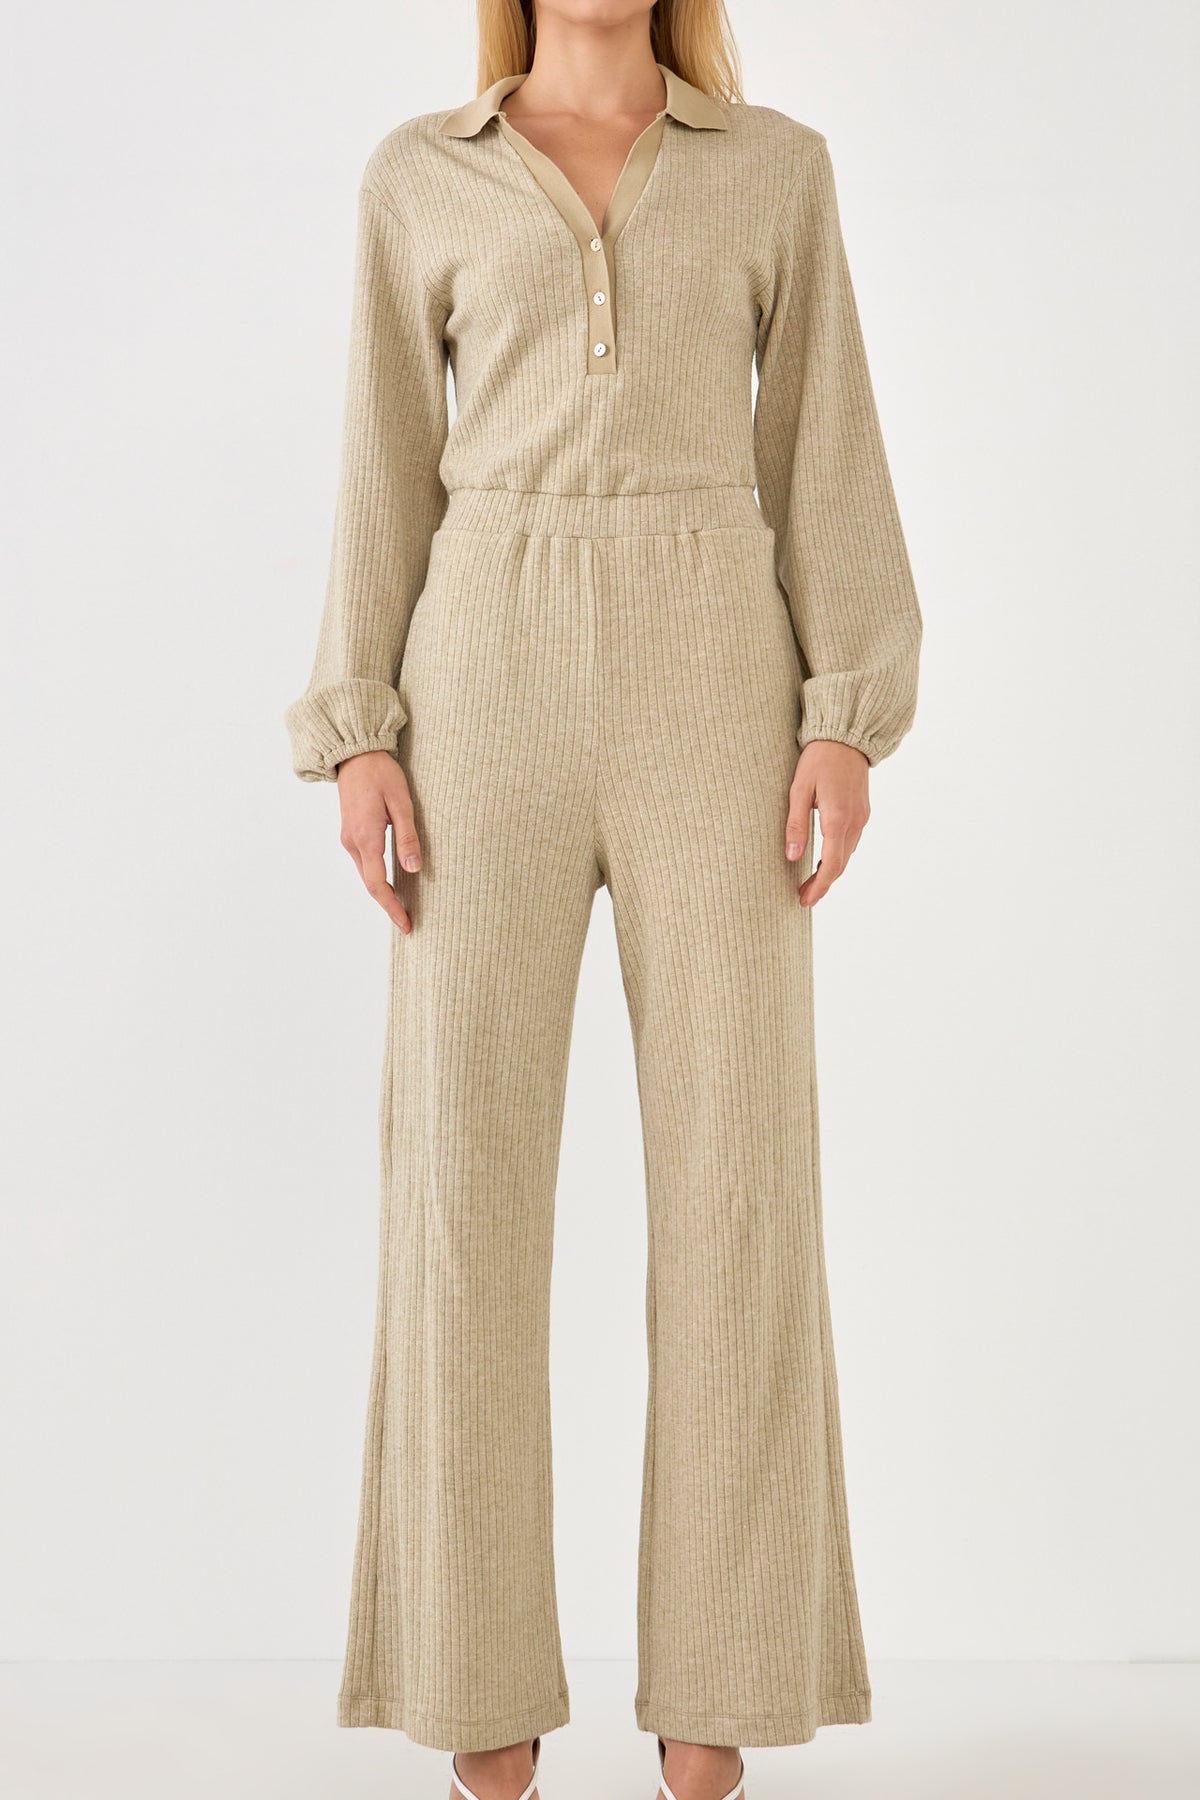 FREE THE ROSES - Collared Knit Jumpsuit - JUMPSUITS available at Objectrare